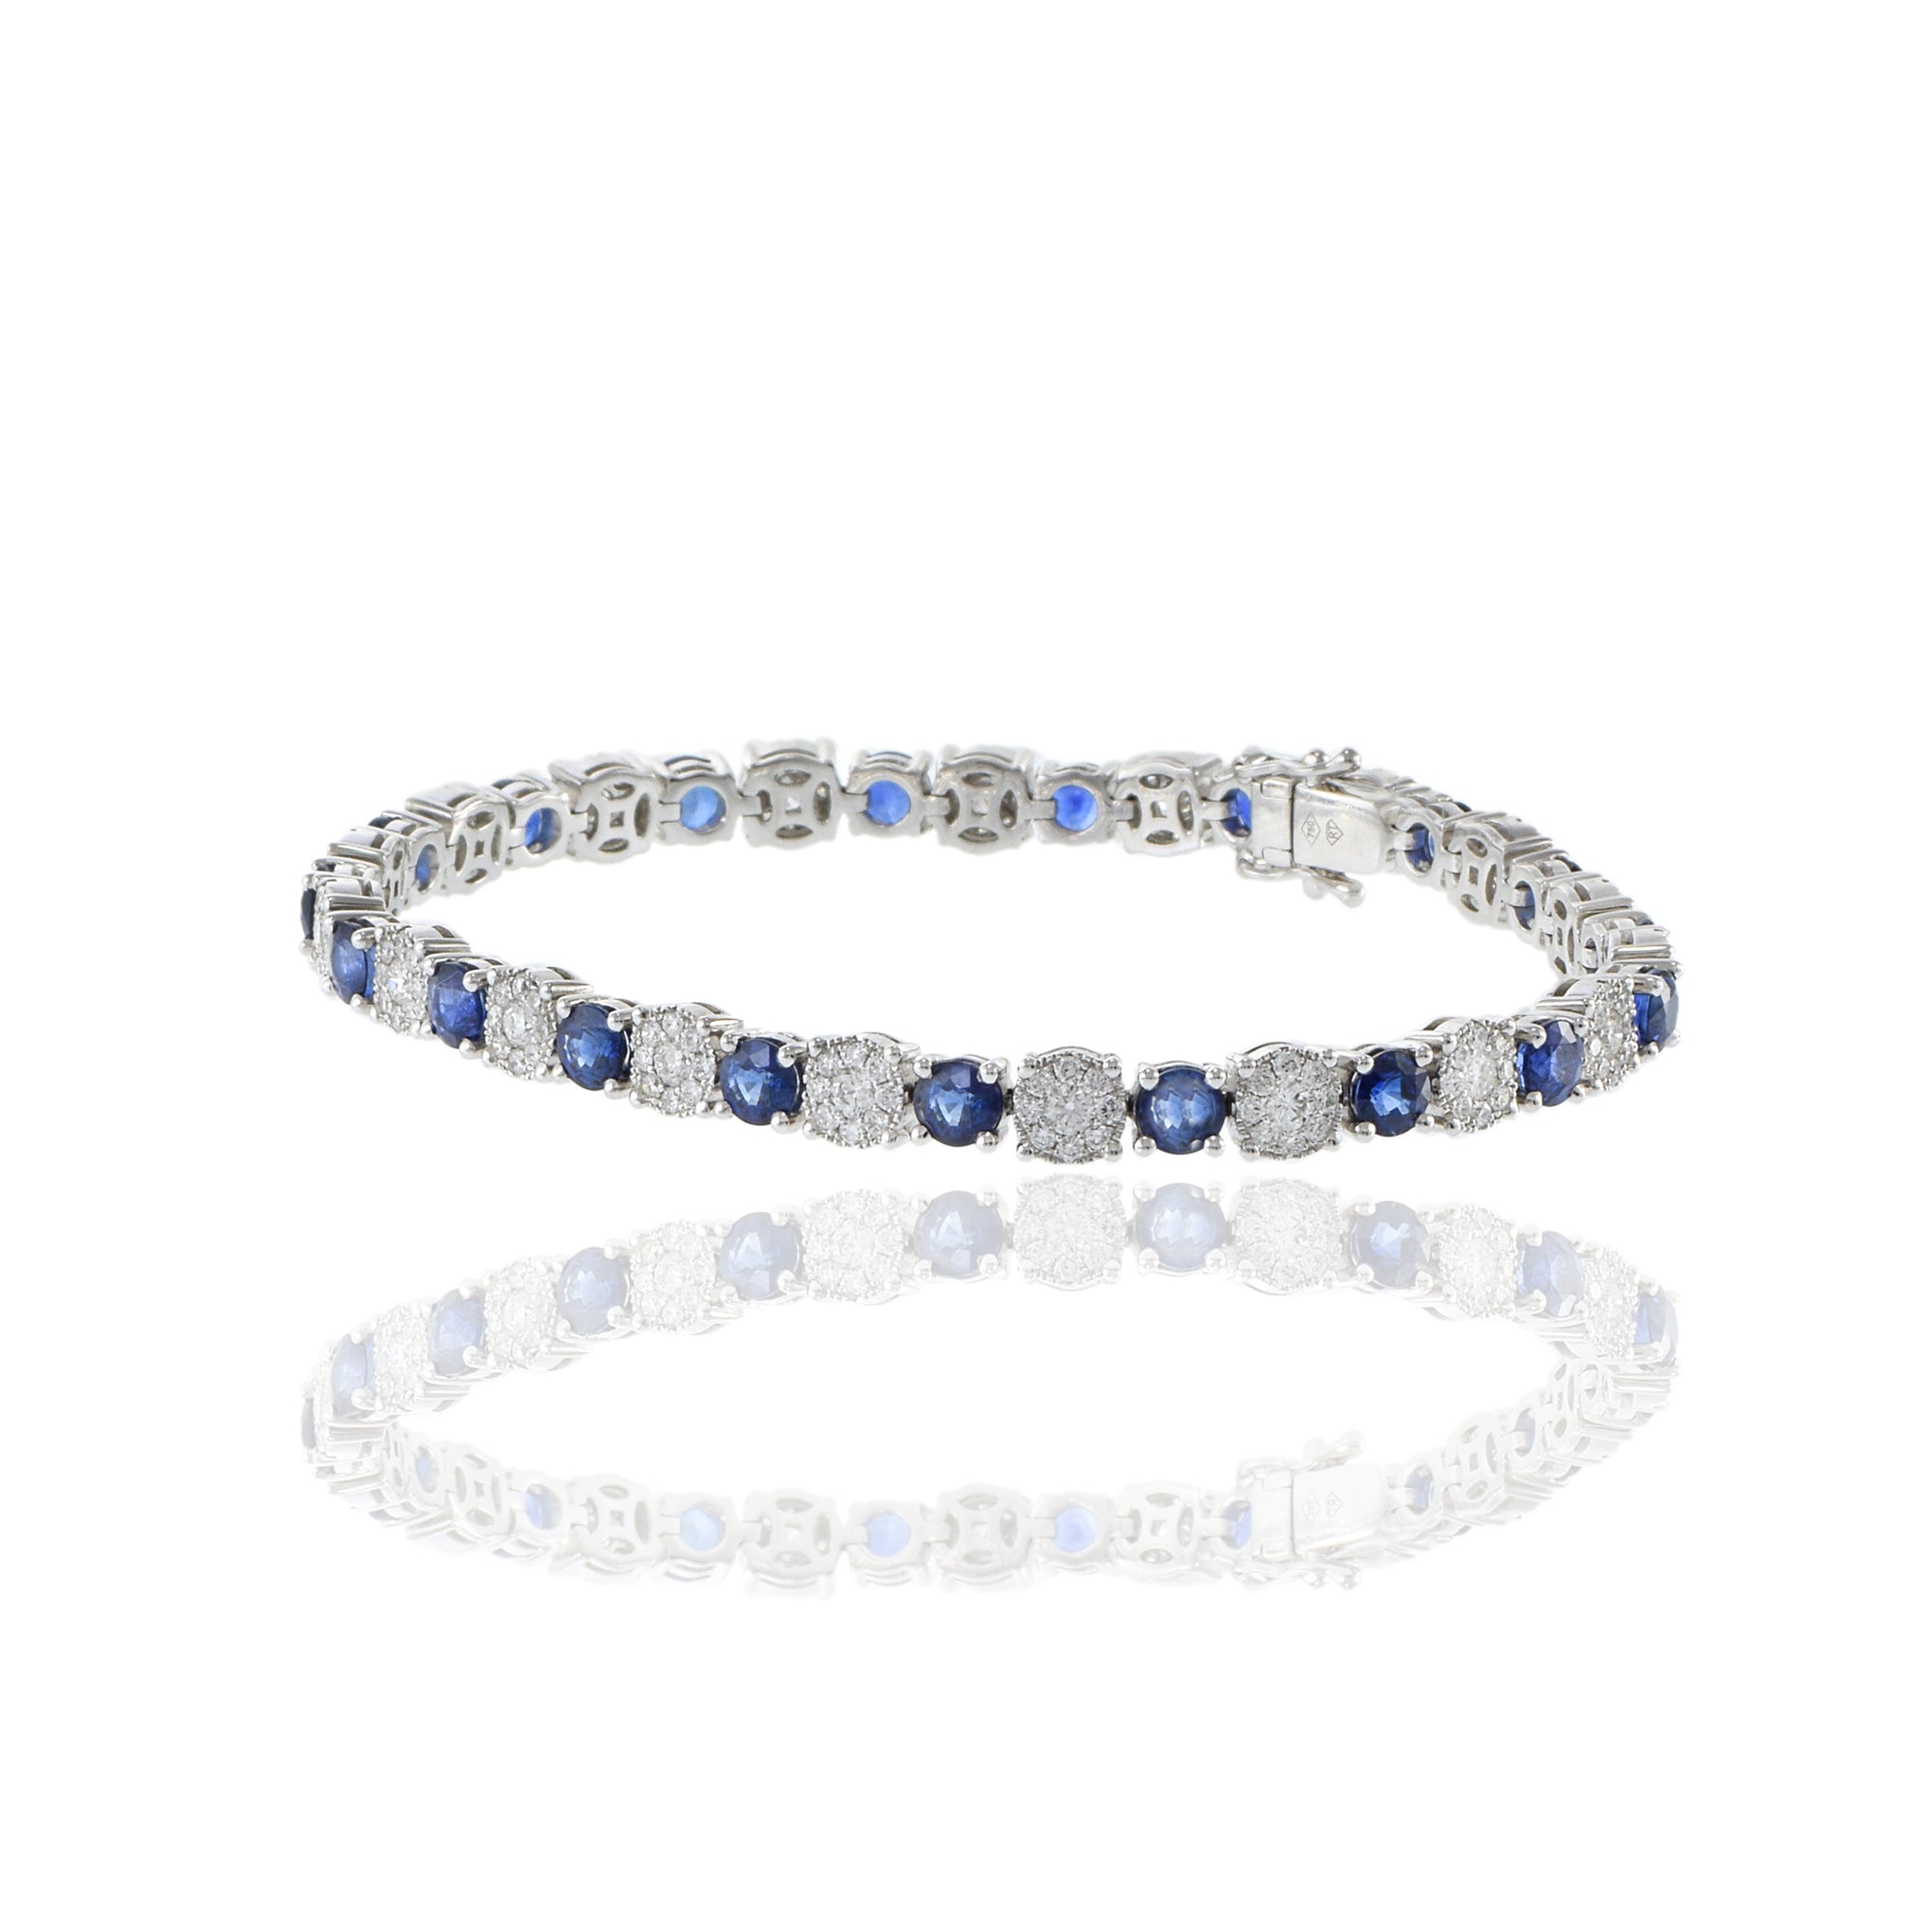 18KT White Gold Round Cut Sapphire And Cluster Diamond Bracelet